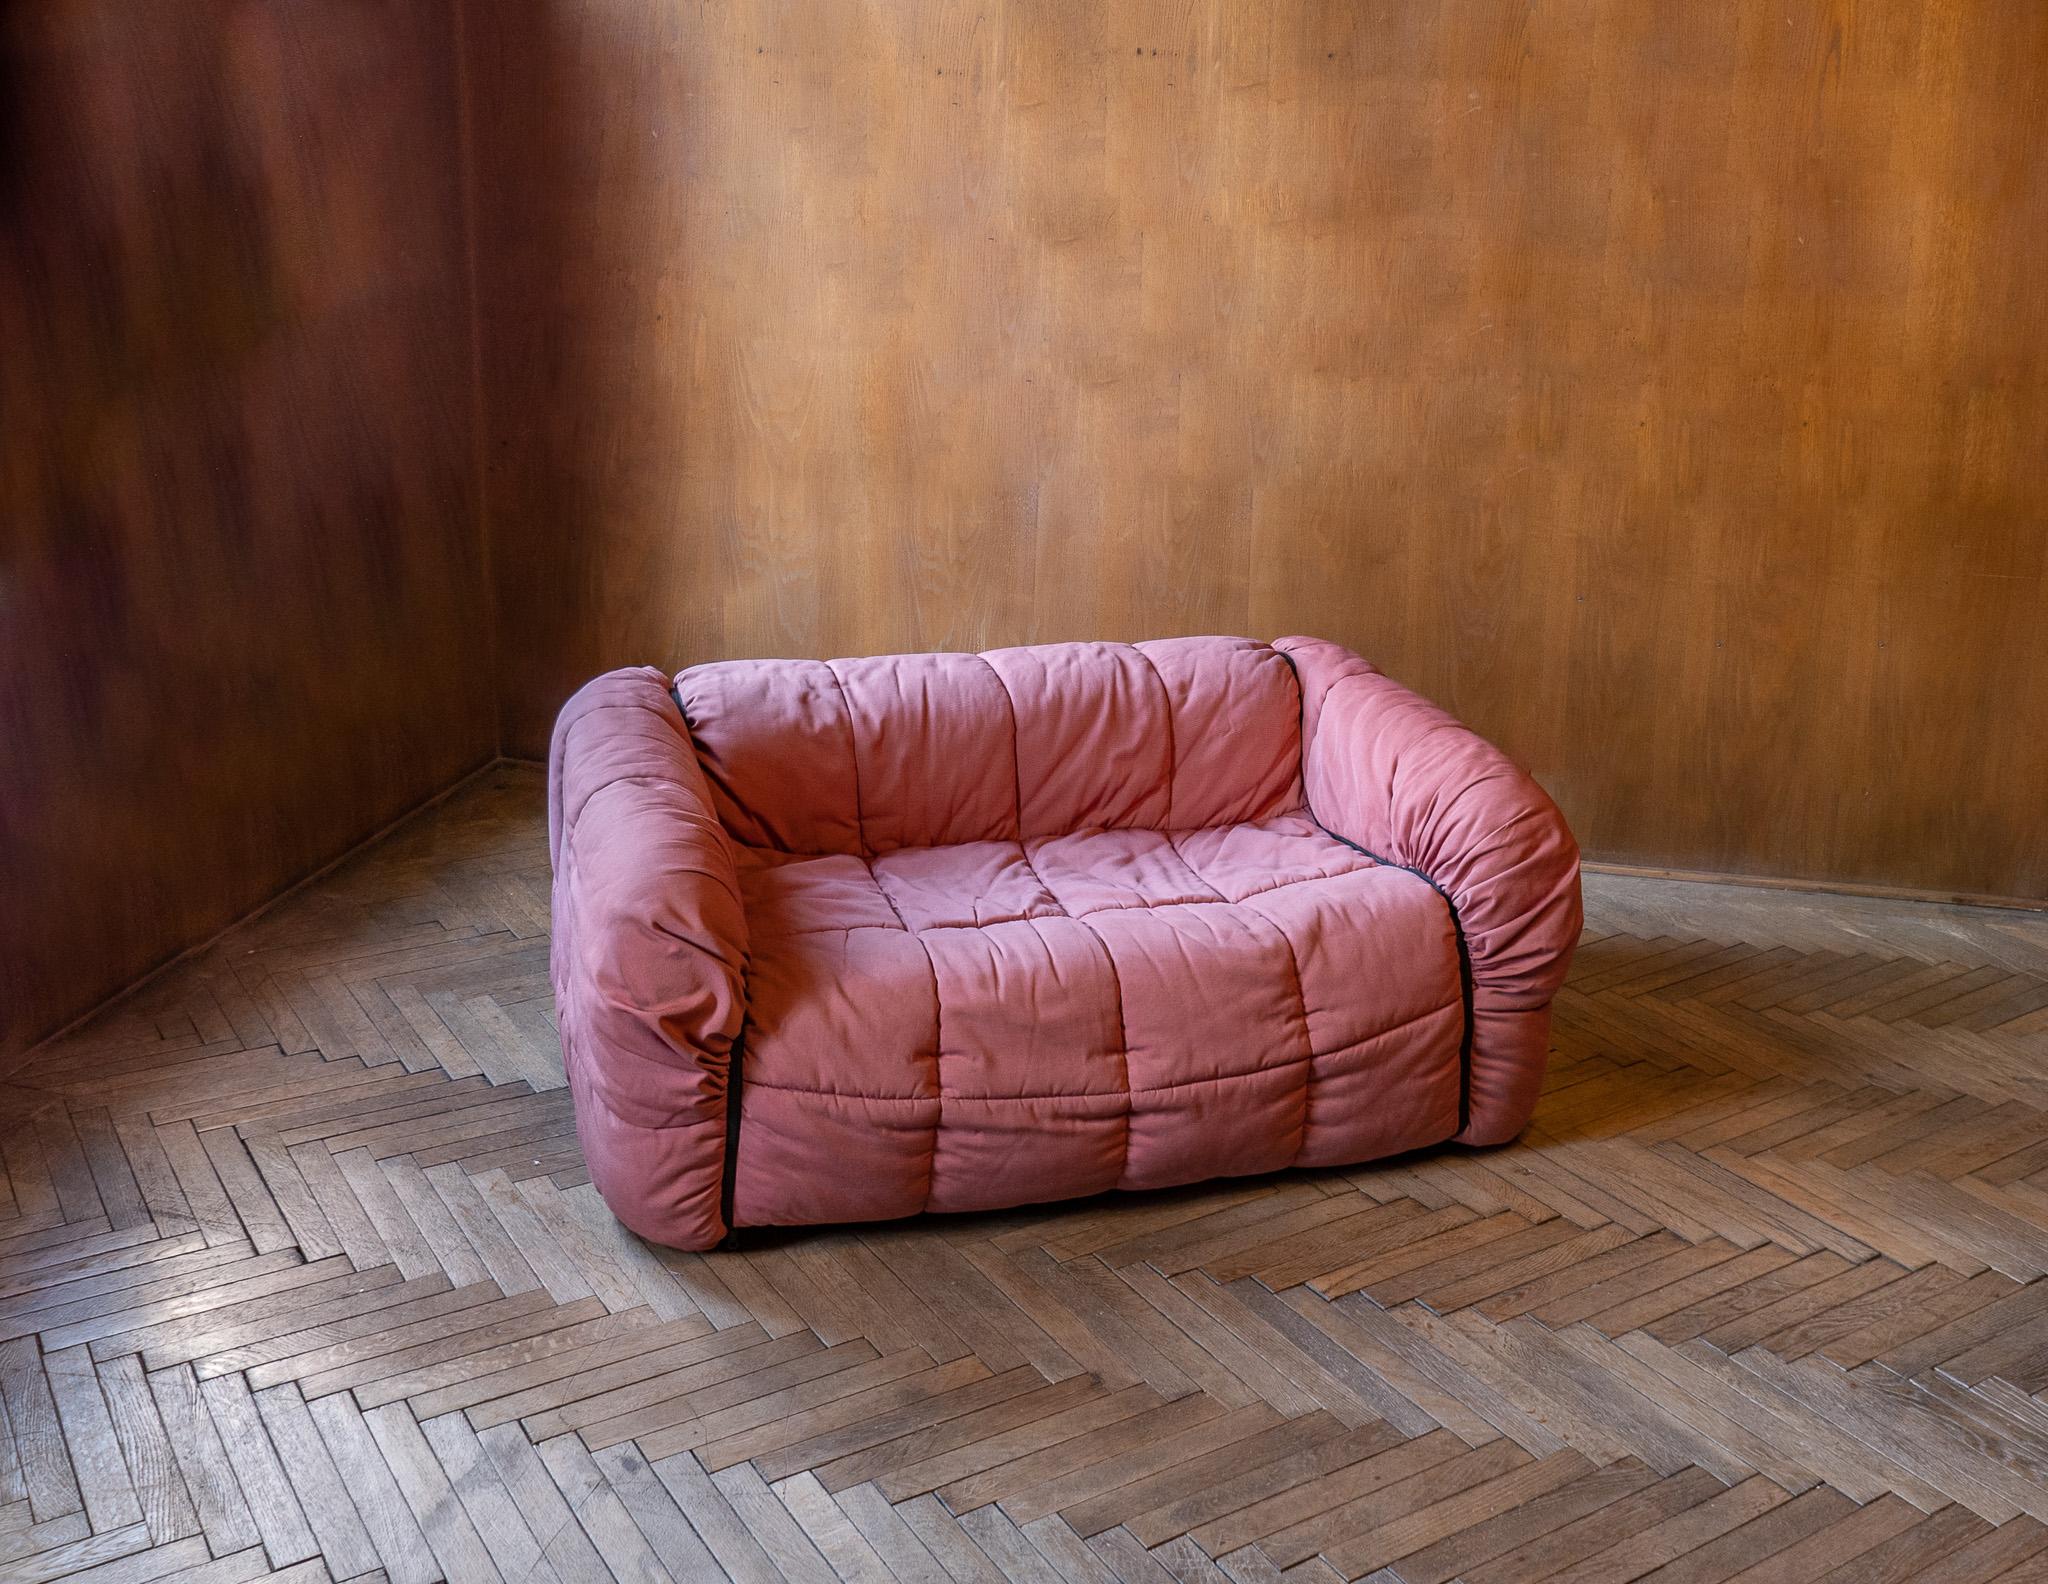 Mid-Century Modern Pink Strips Sofa by Cini Boeri for Arflex, Italy, 1970s.

This 2 seater sofa “strips” was desigend by Cini Boeri for Arflex in the 70s. 
The Strip sofa designed by Cini Boeri, which is a stunning 2-seater sofa that embodies